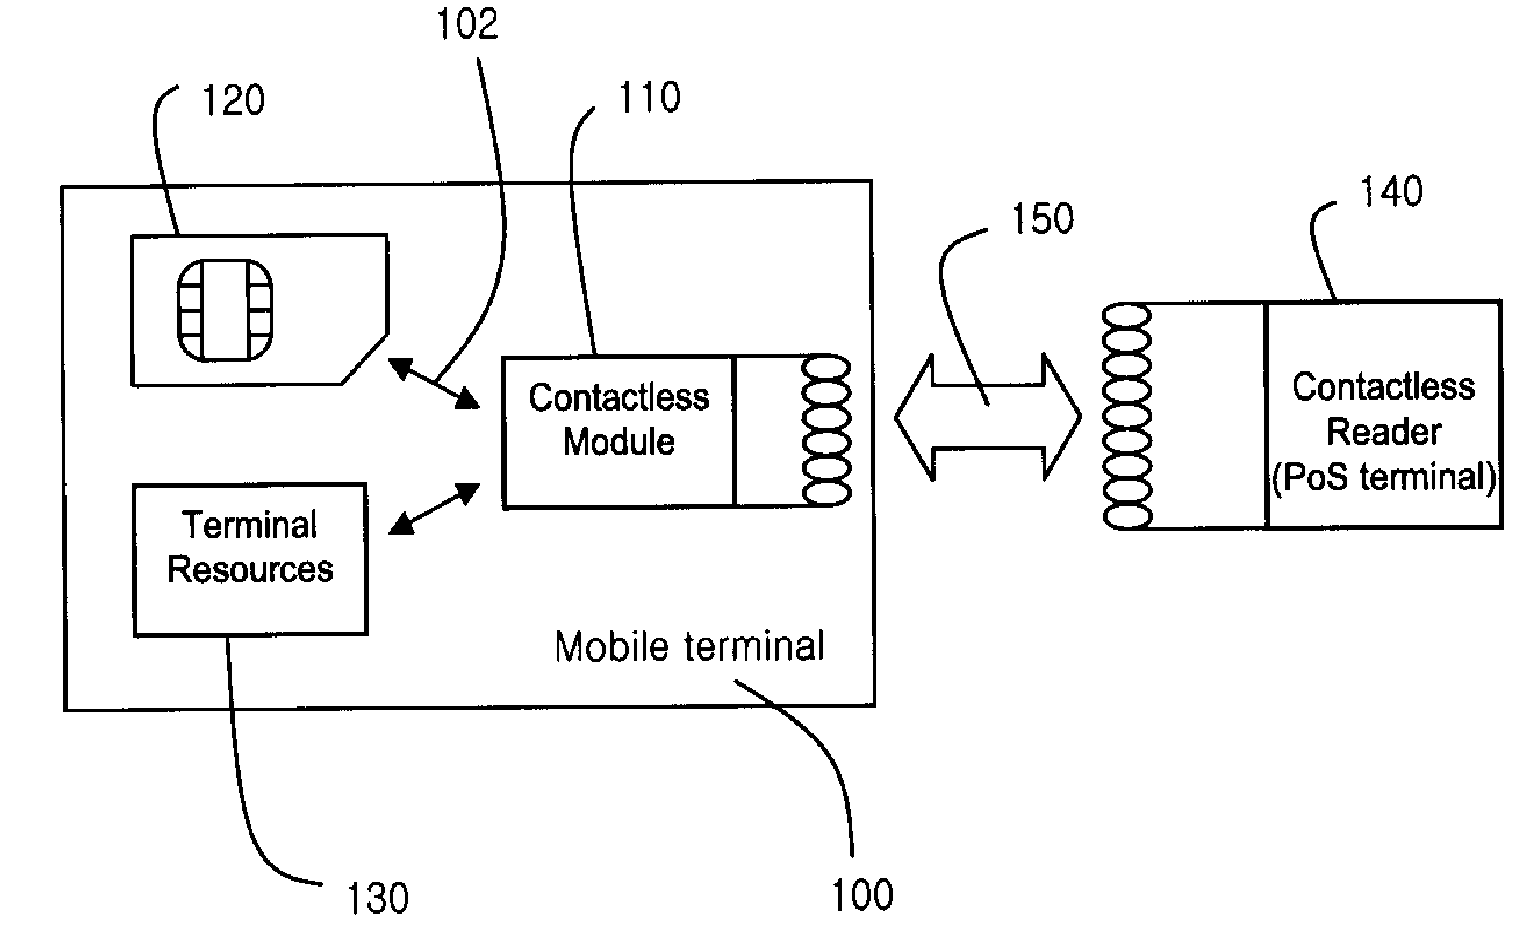 Performing contactless applications in battery off mode